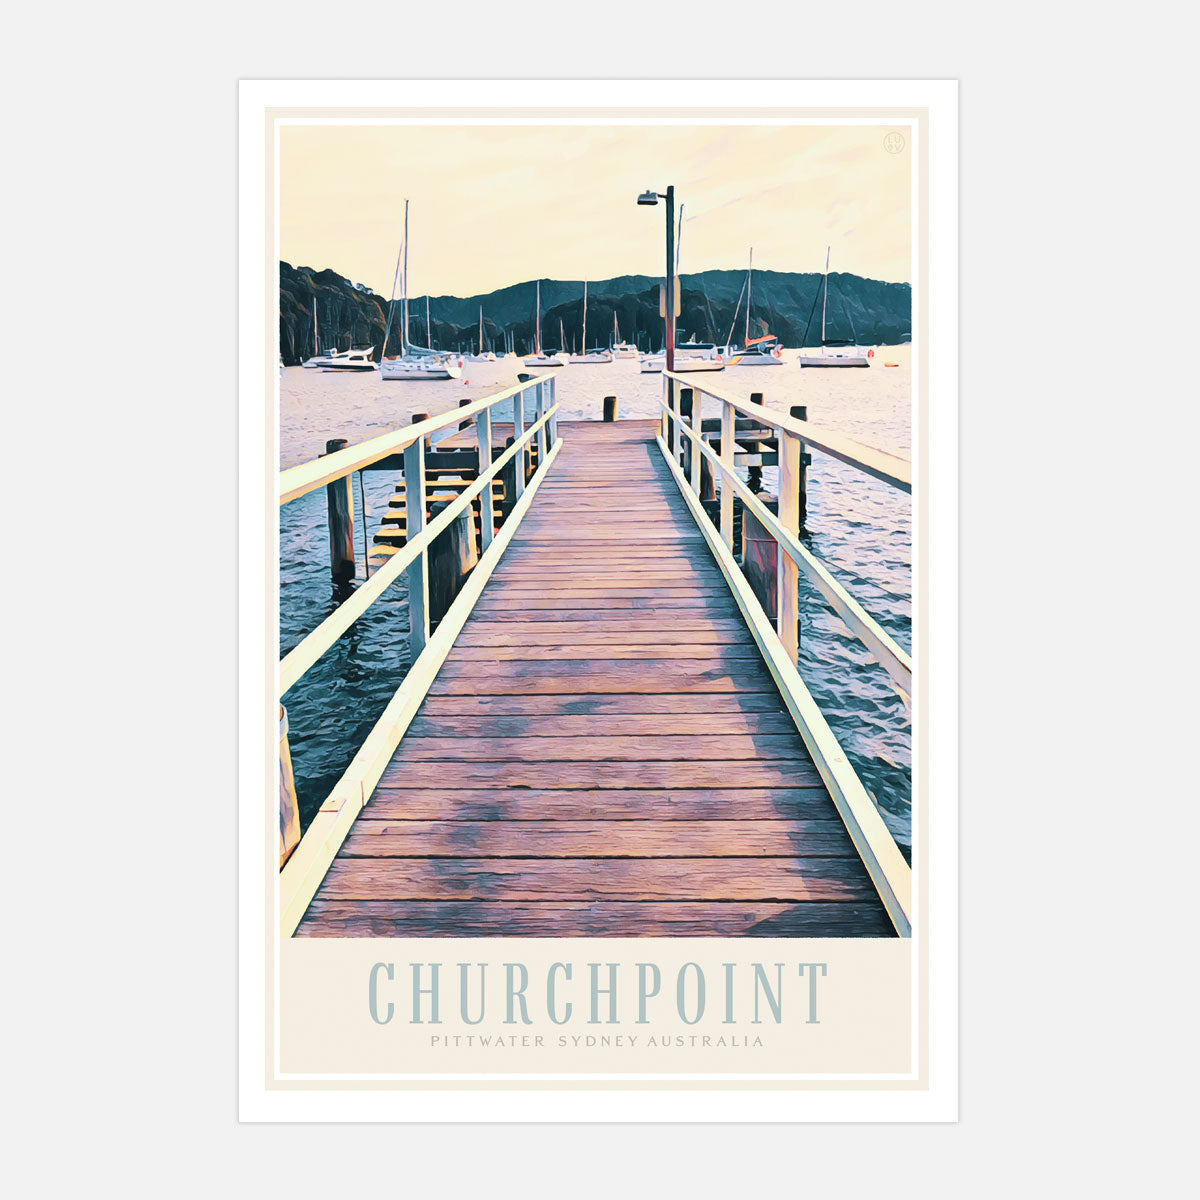 Churchpoint Sydney retro vintage travel print from Places We Luv